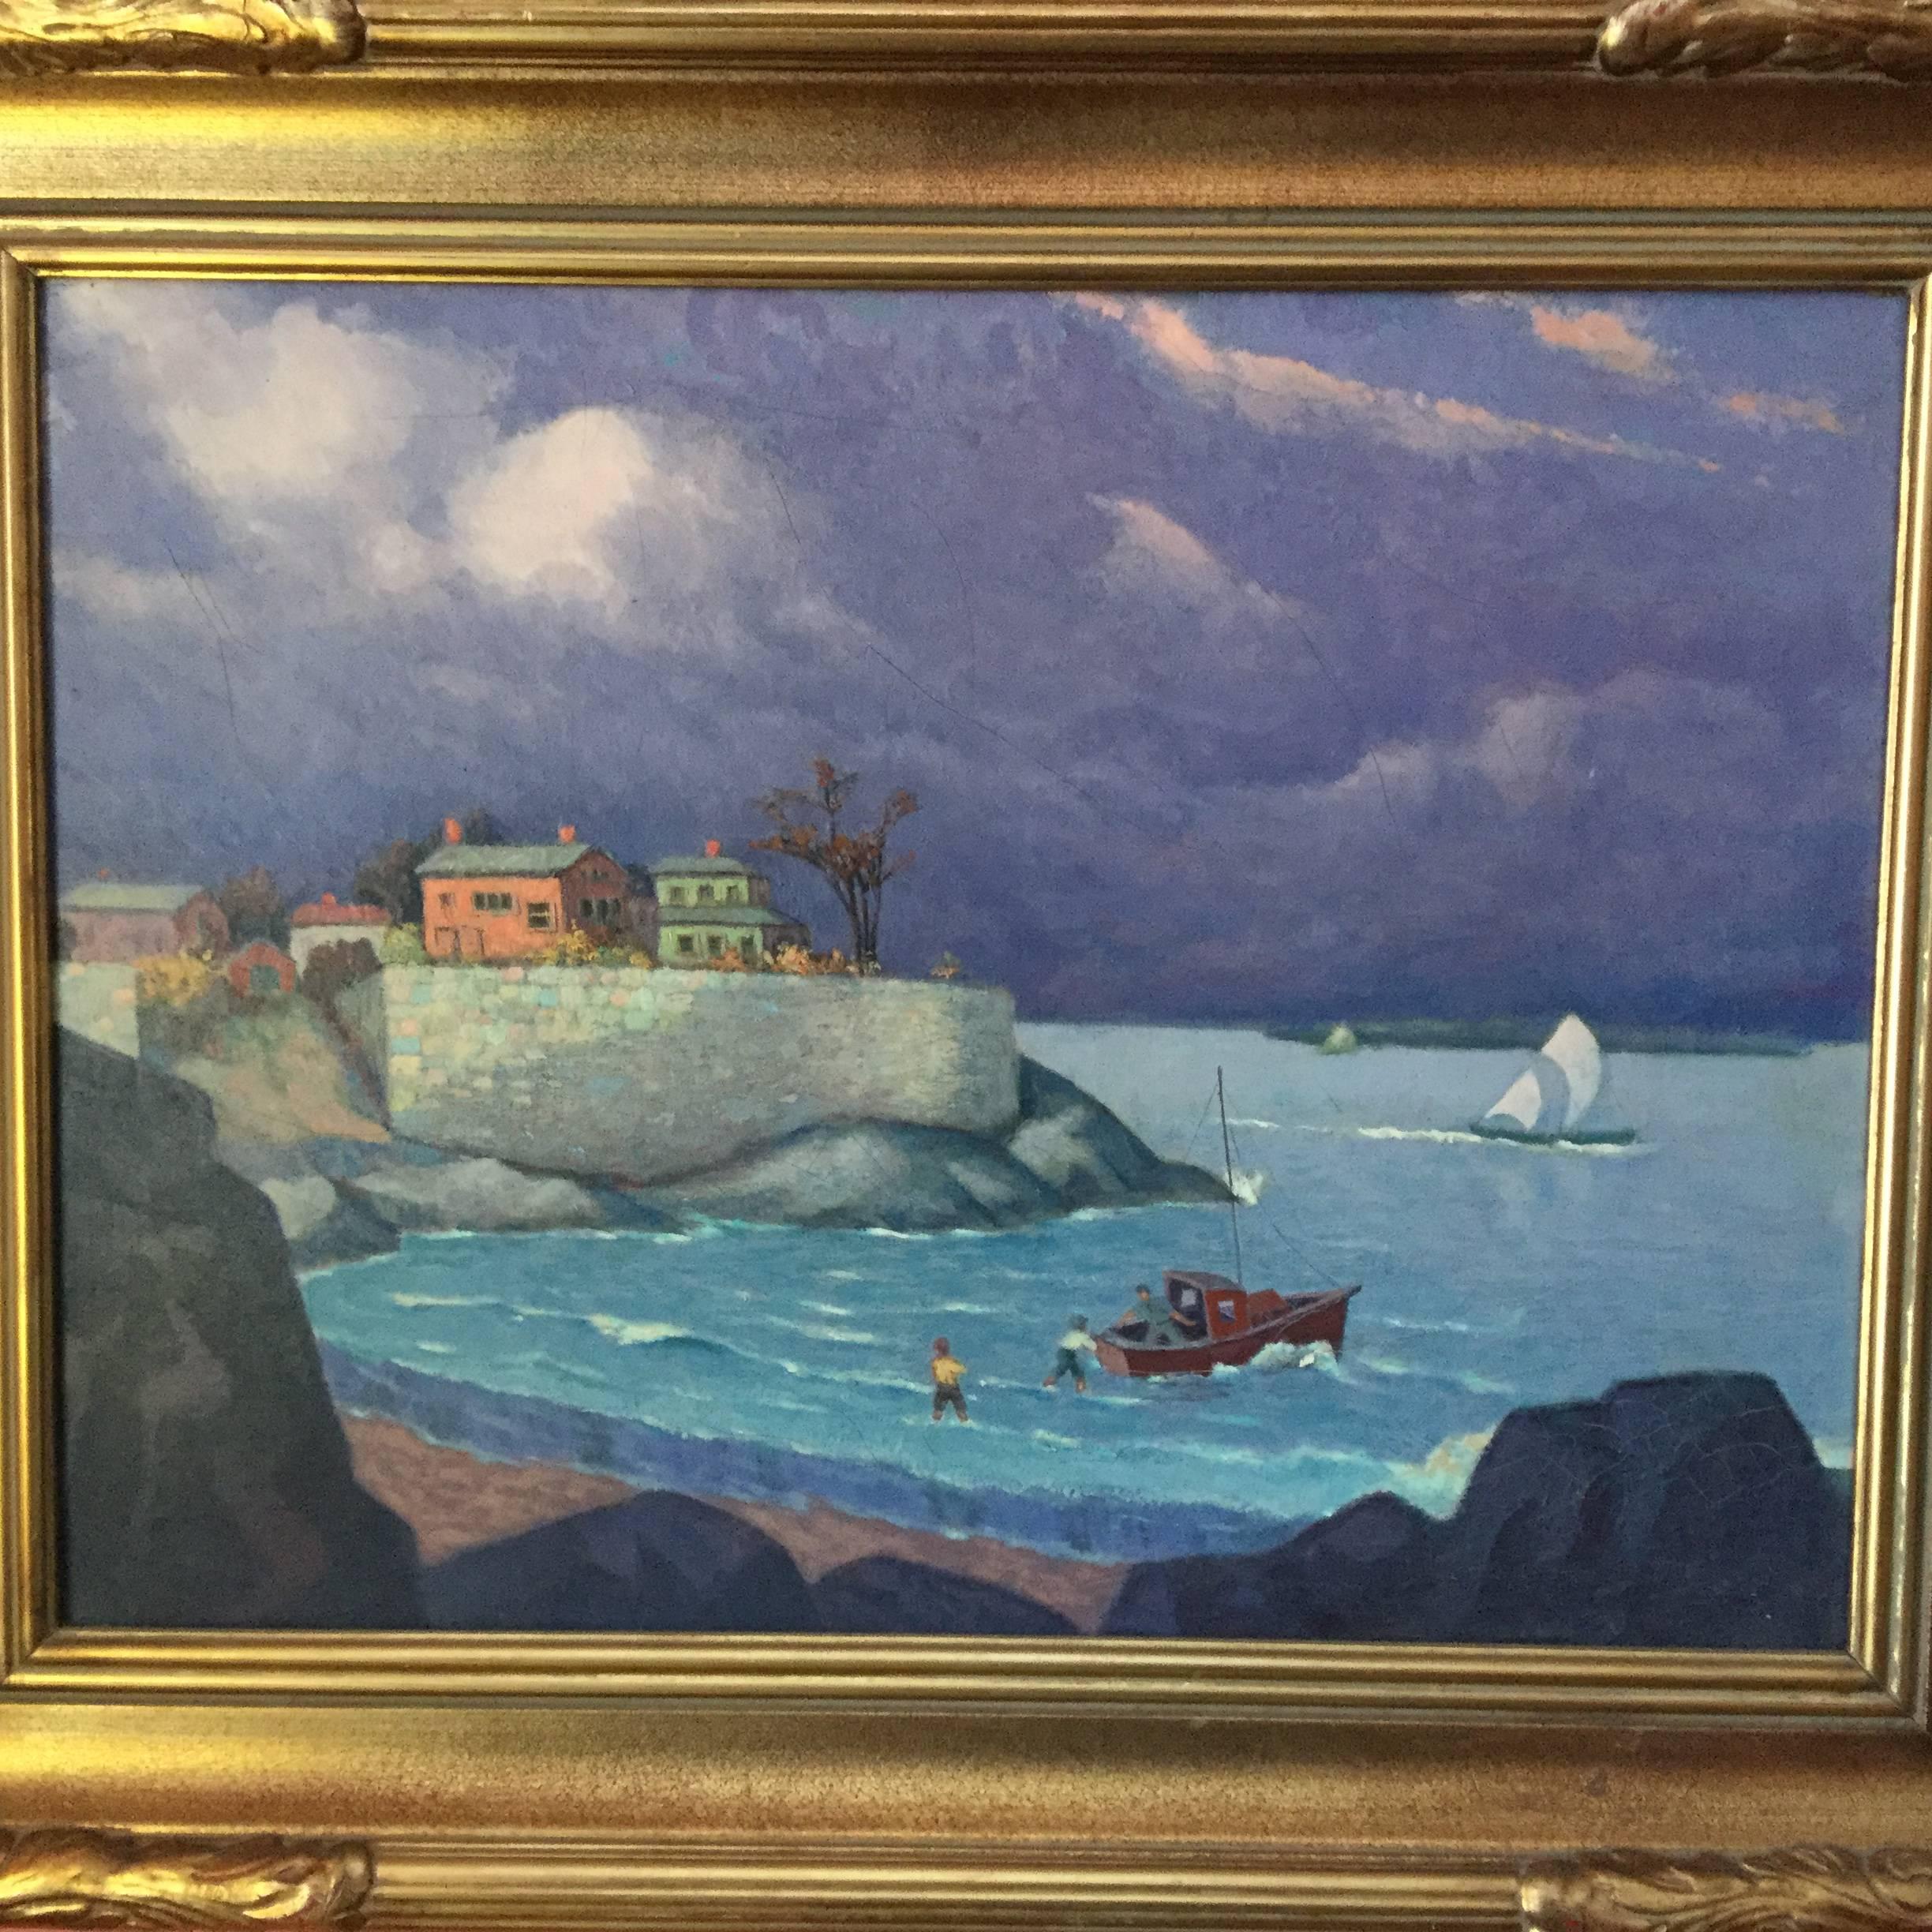 Formalist seascape Maine coast, circa 1930. Oil on board framed in newer arts and crafts gold frame (needs to be reframed) . It's a masterwork unsigned. I had several works by this unknown artist in my private collection. Proof great art goes